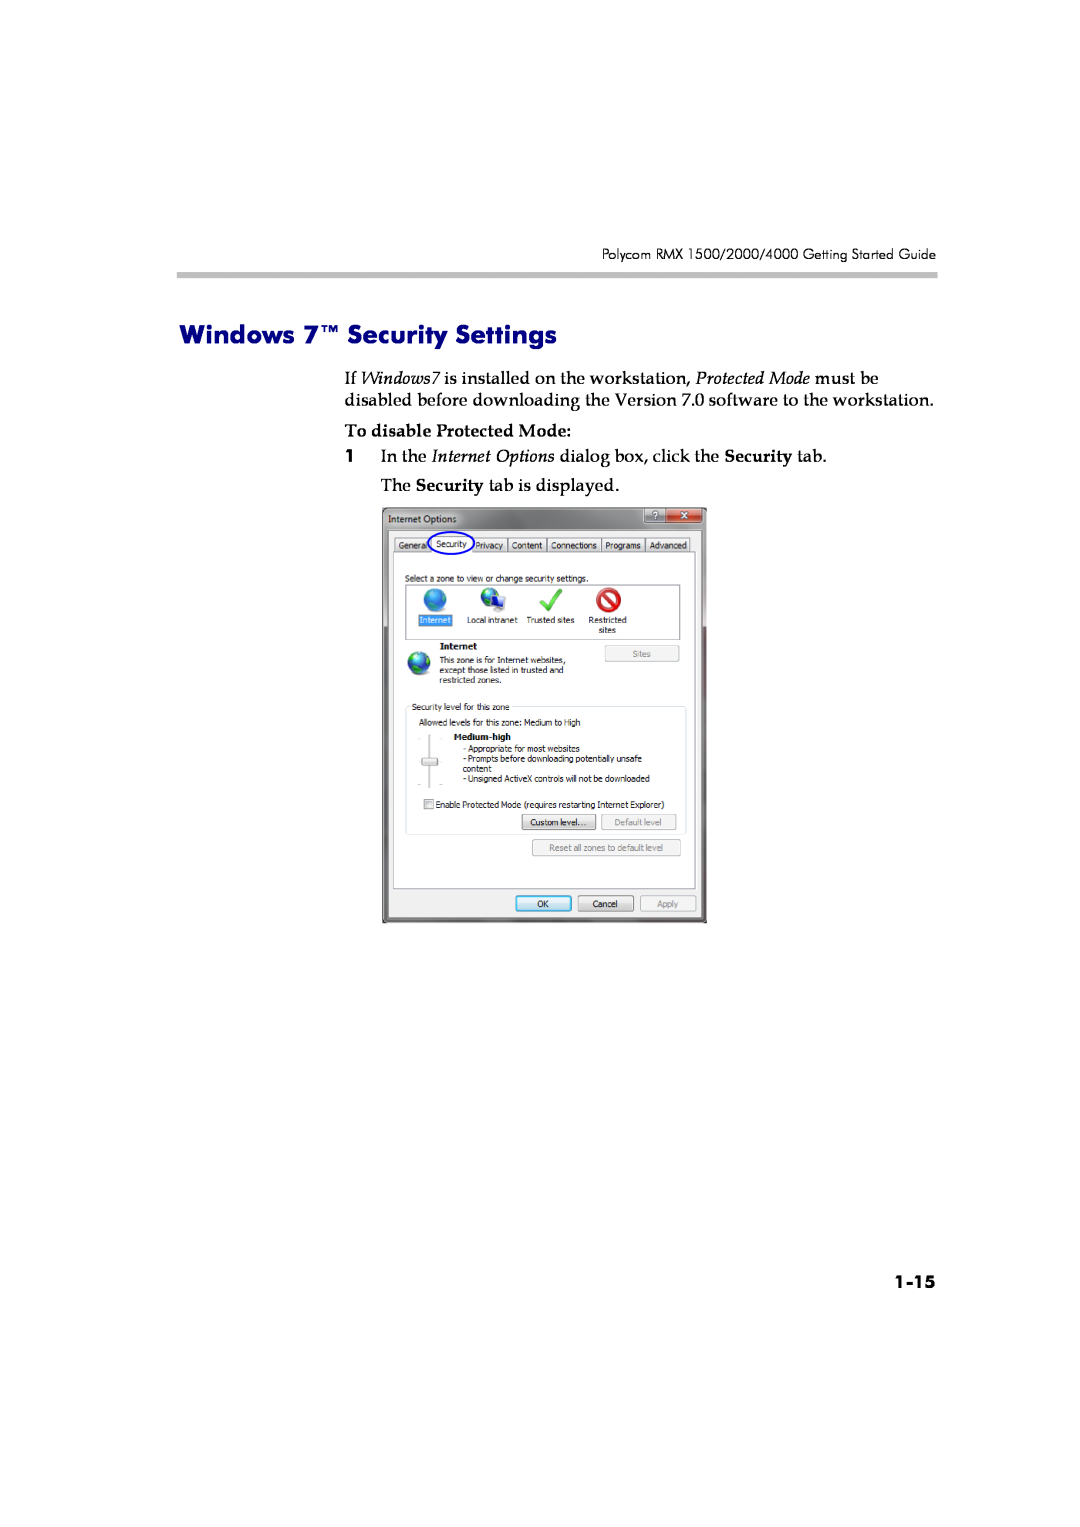 Polycom DOC2560B manual Windows 7 Security Settings, To disable Protected Mode, 1-15 